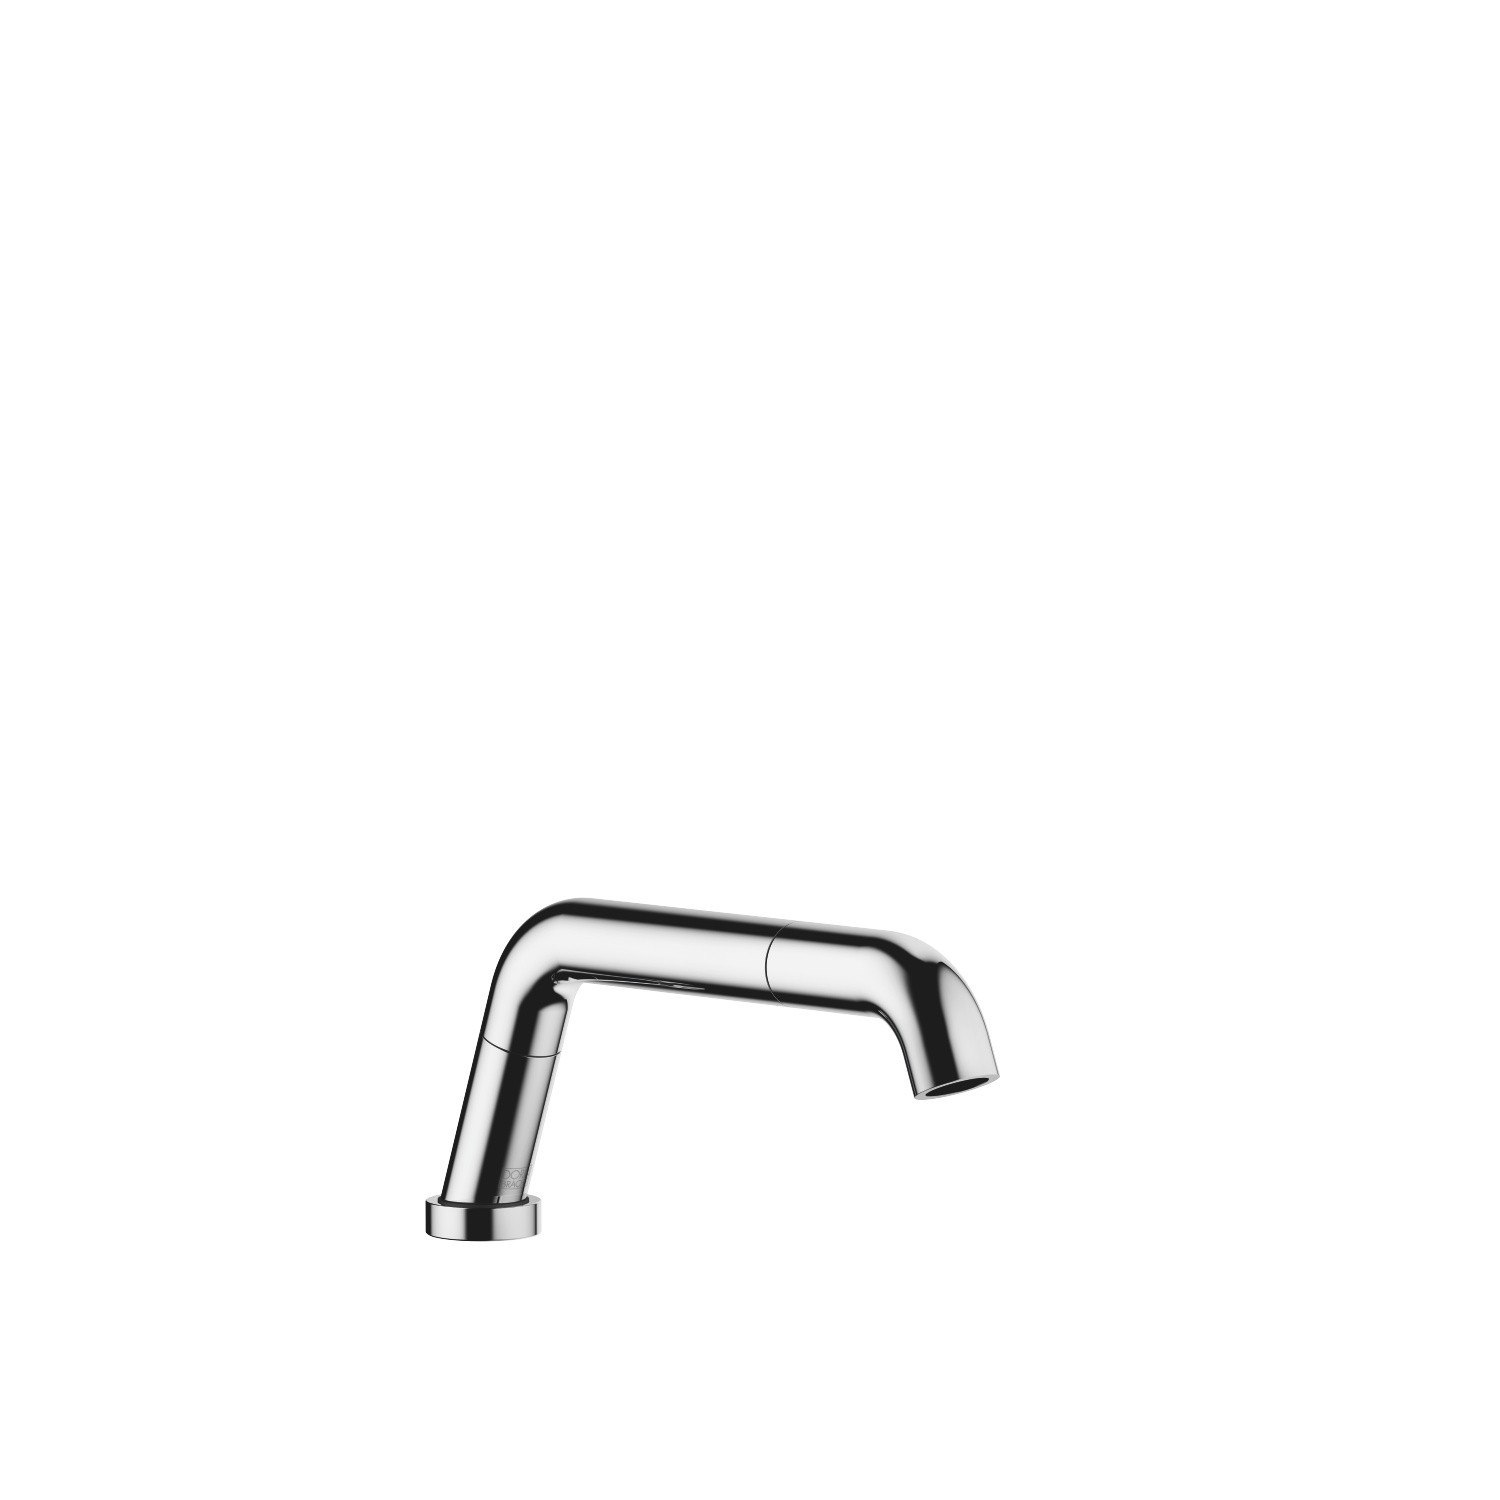 DORNBRACHT 27738973-0010 1.8 GPM DECK MOUNT AFFUSION PIPE HAND SHOWER FOR KNEIPP TREATMENTS